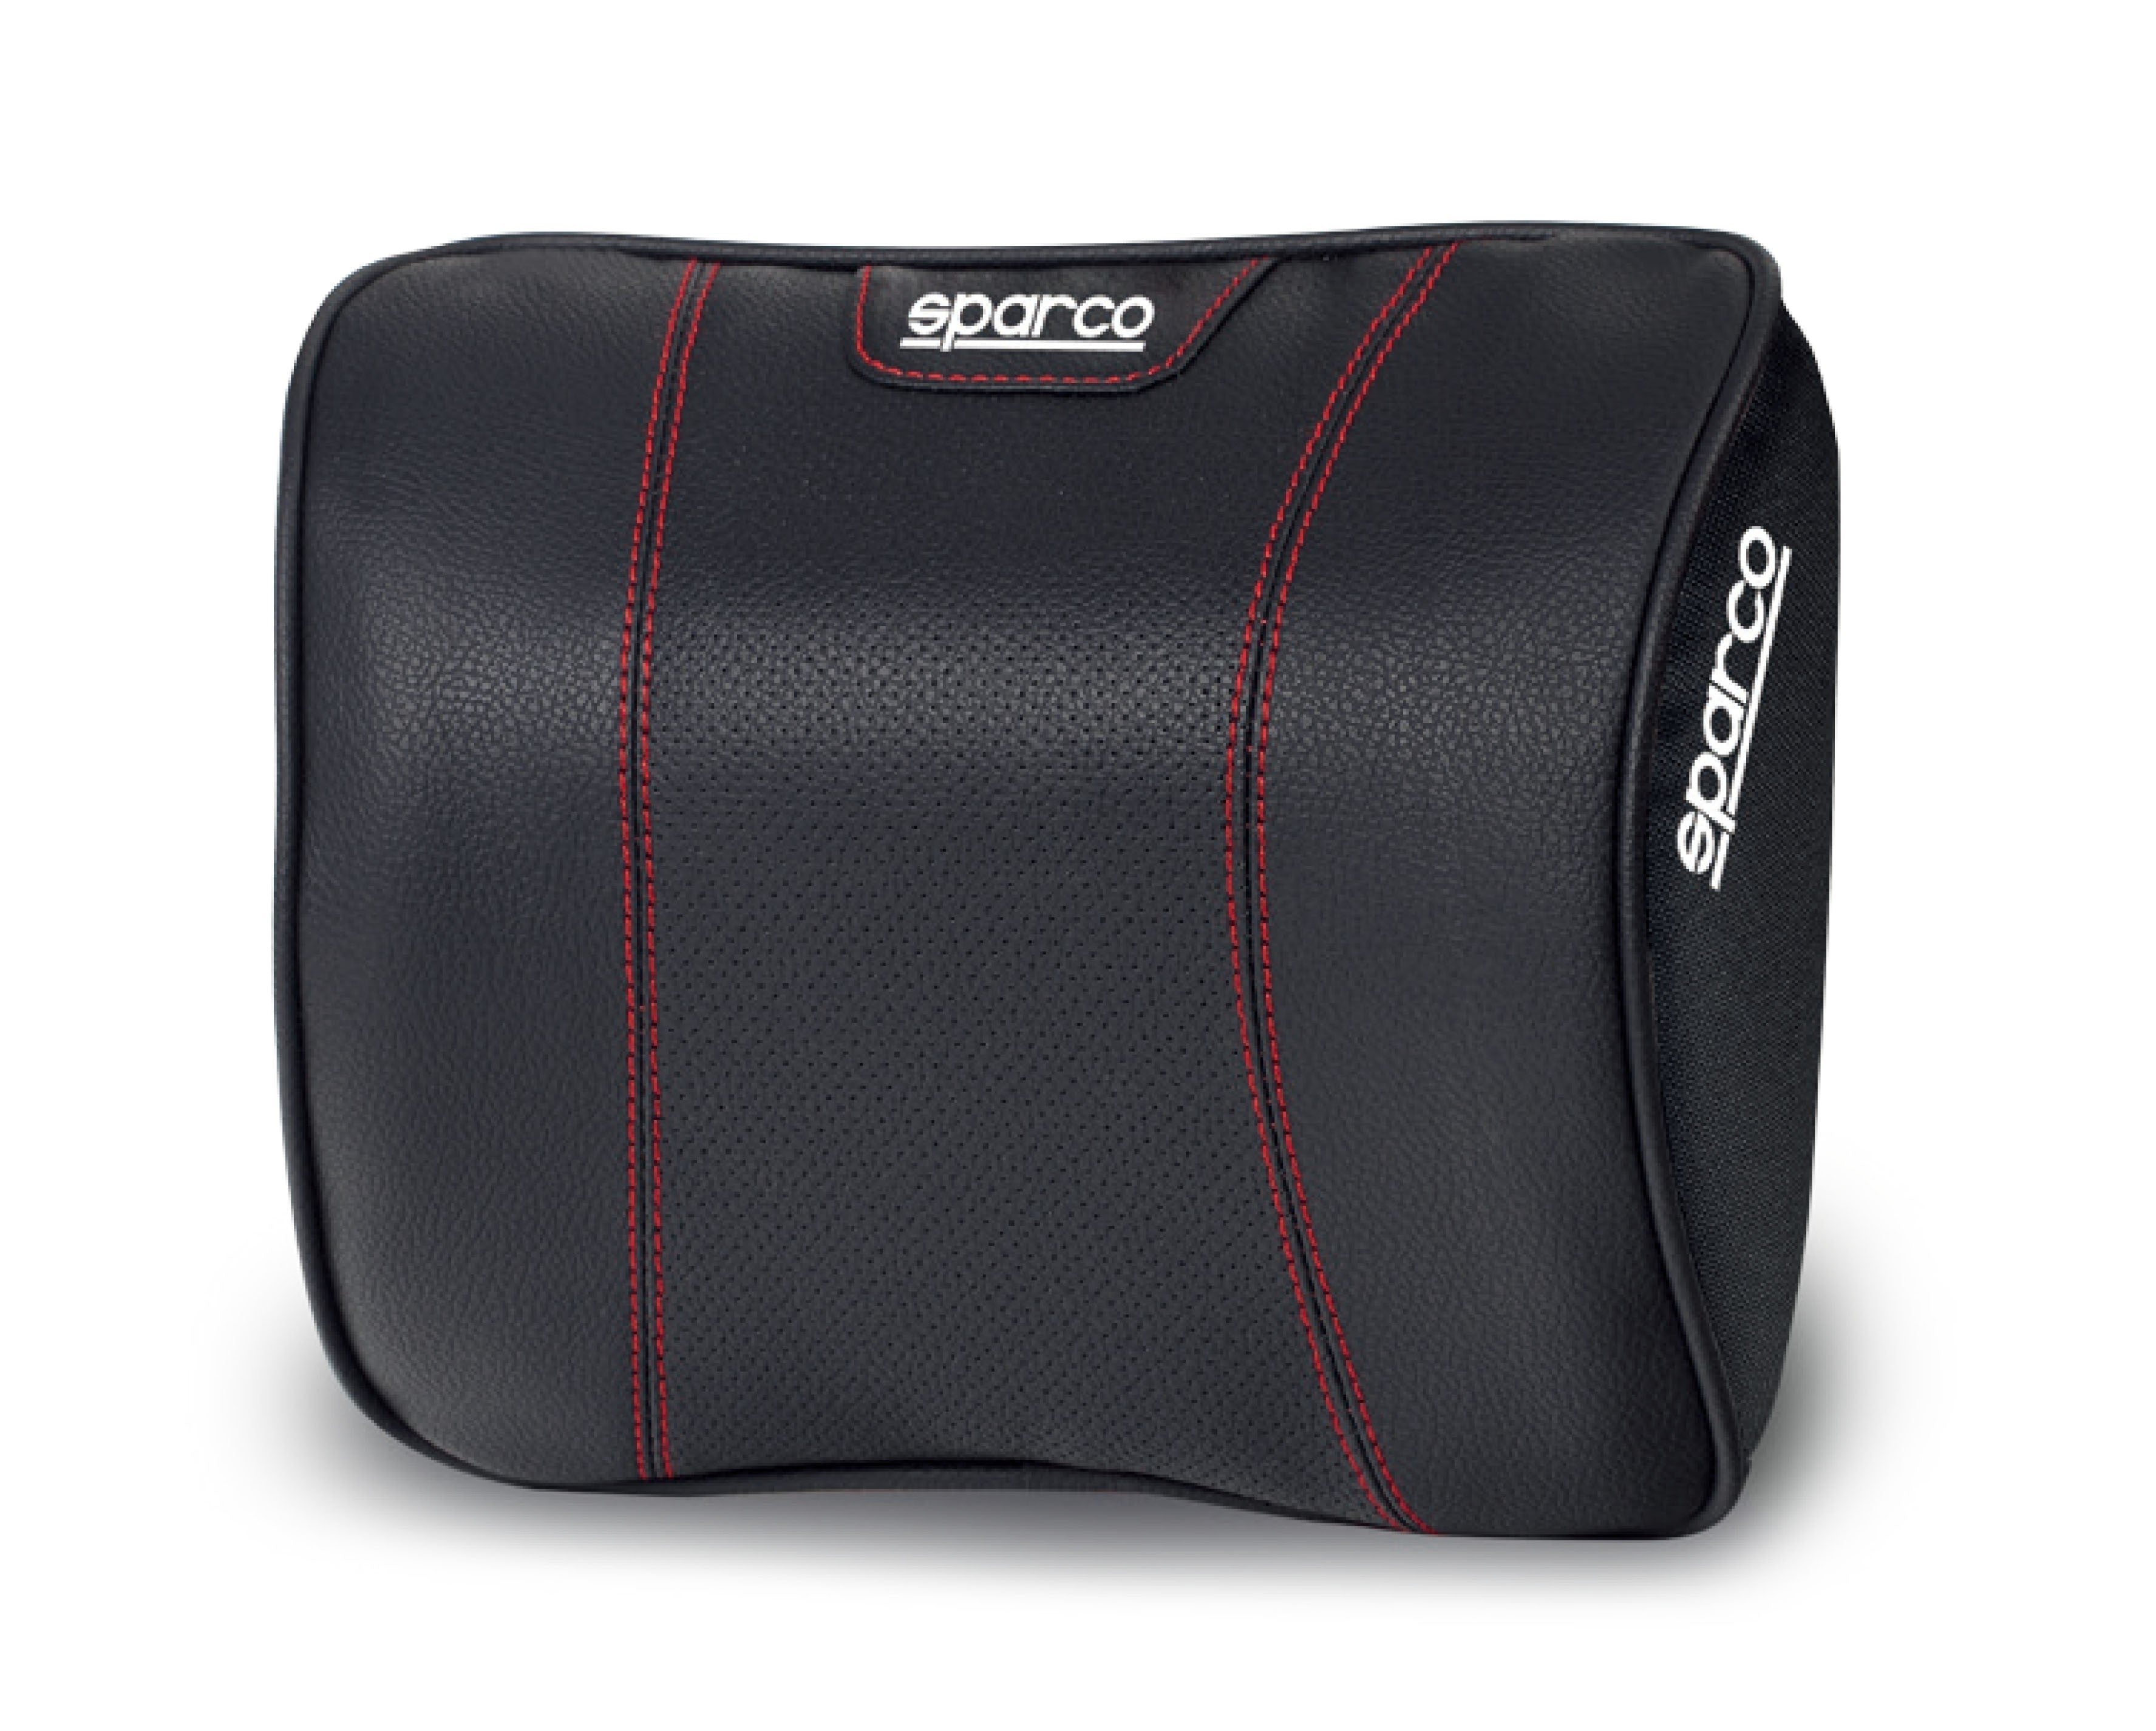 Sparco Neck Pillow Perforated PVC + Memory Foam.